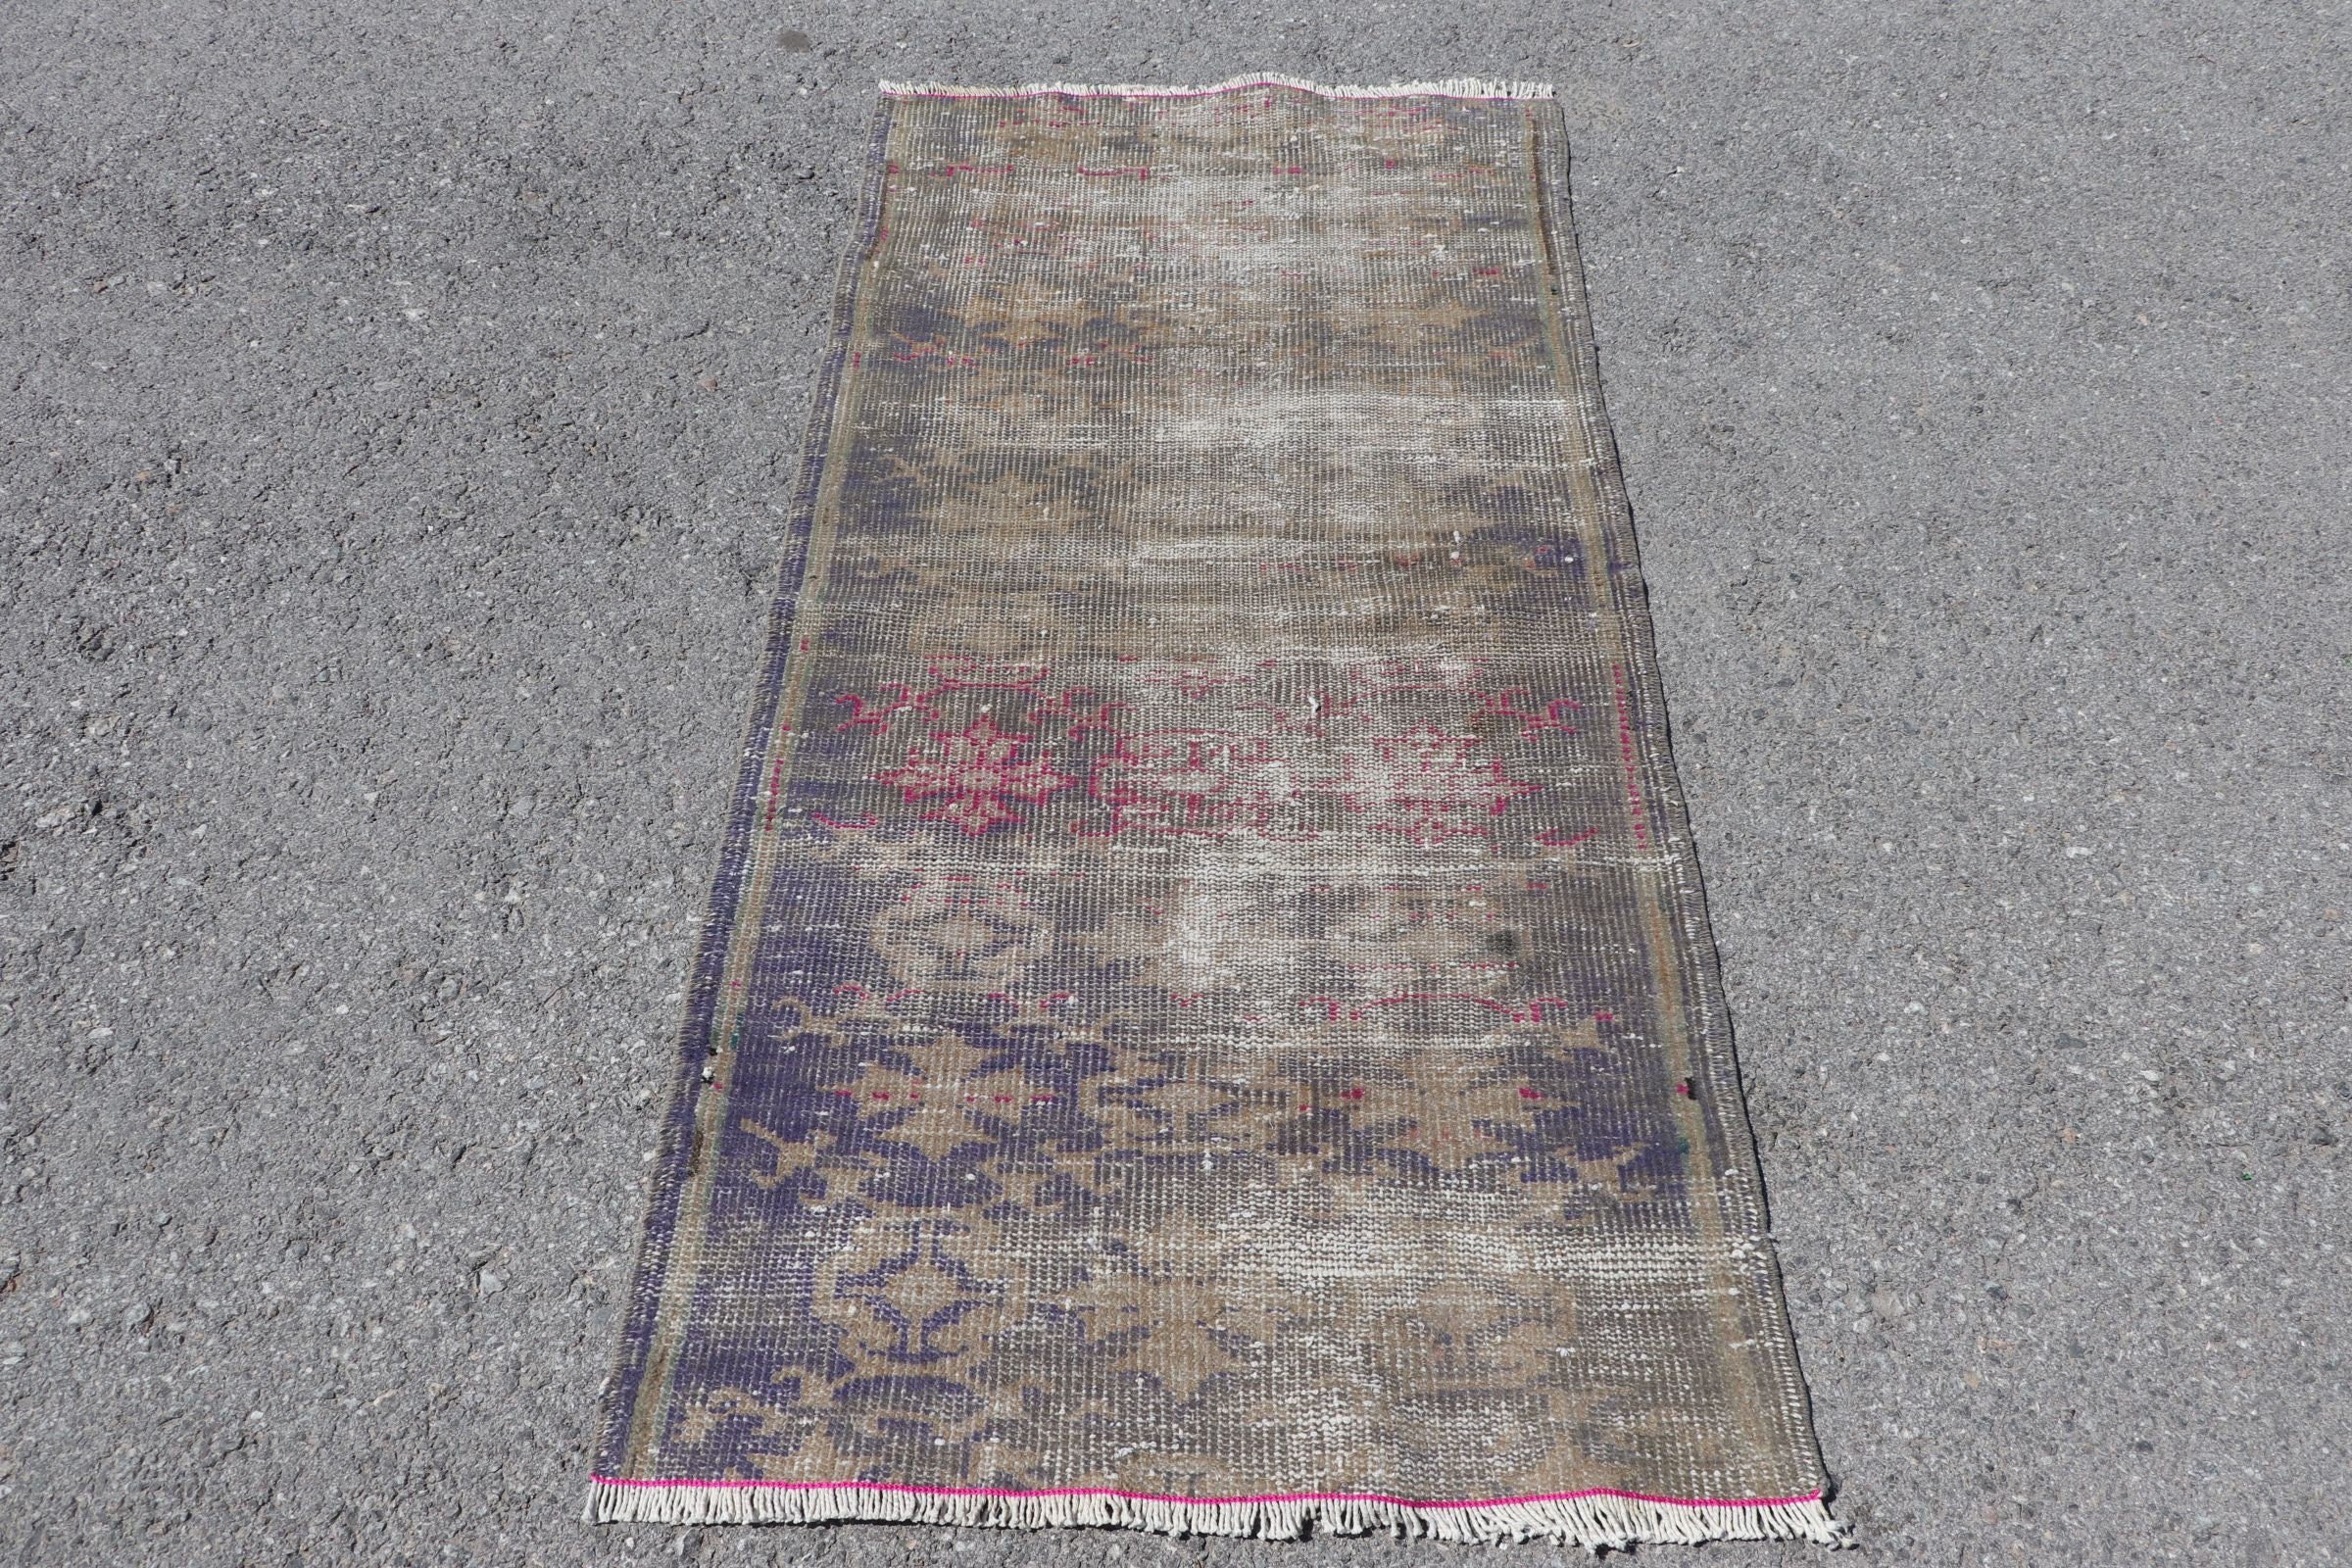 Vintage Rug, Turkish Rugs, Rugs for Kitchen, Cool Rugs, Bedroom Rug, Purple Anatolian Rugs, Kitchen Rug, 2.5x5 ft Small Rugs